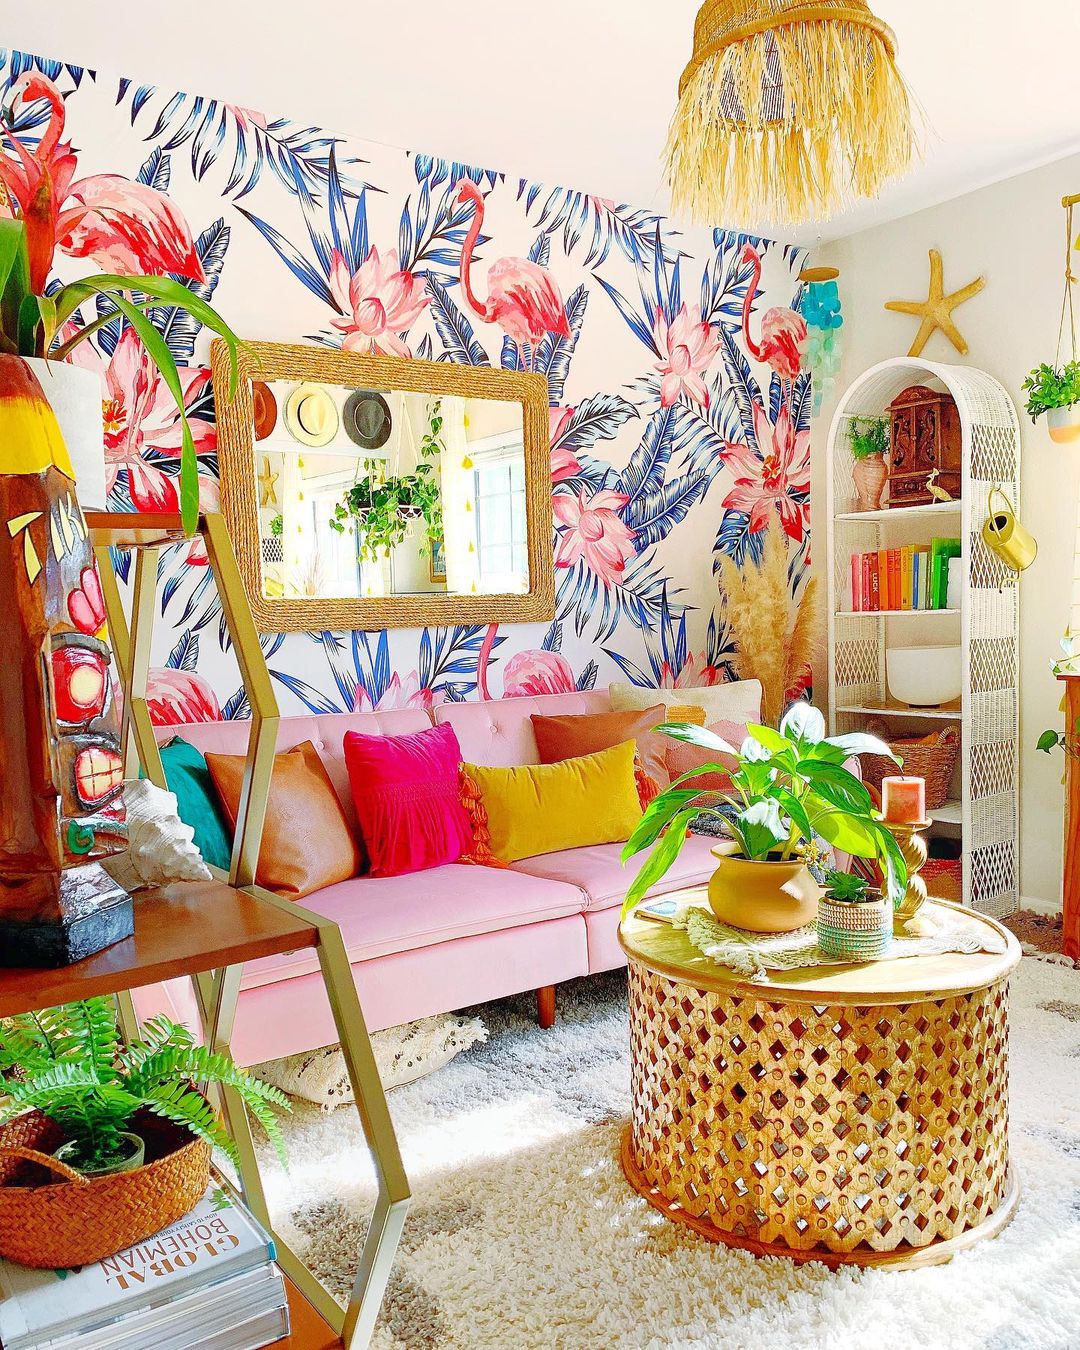 29 Boho Decor Ideas for Various Spaces Within Your Home